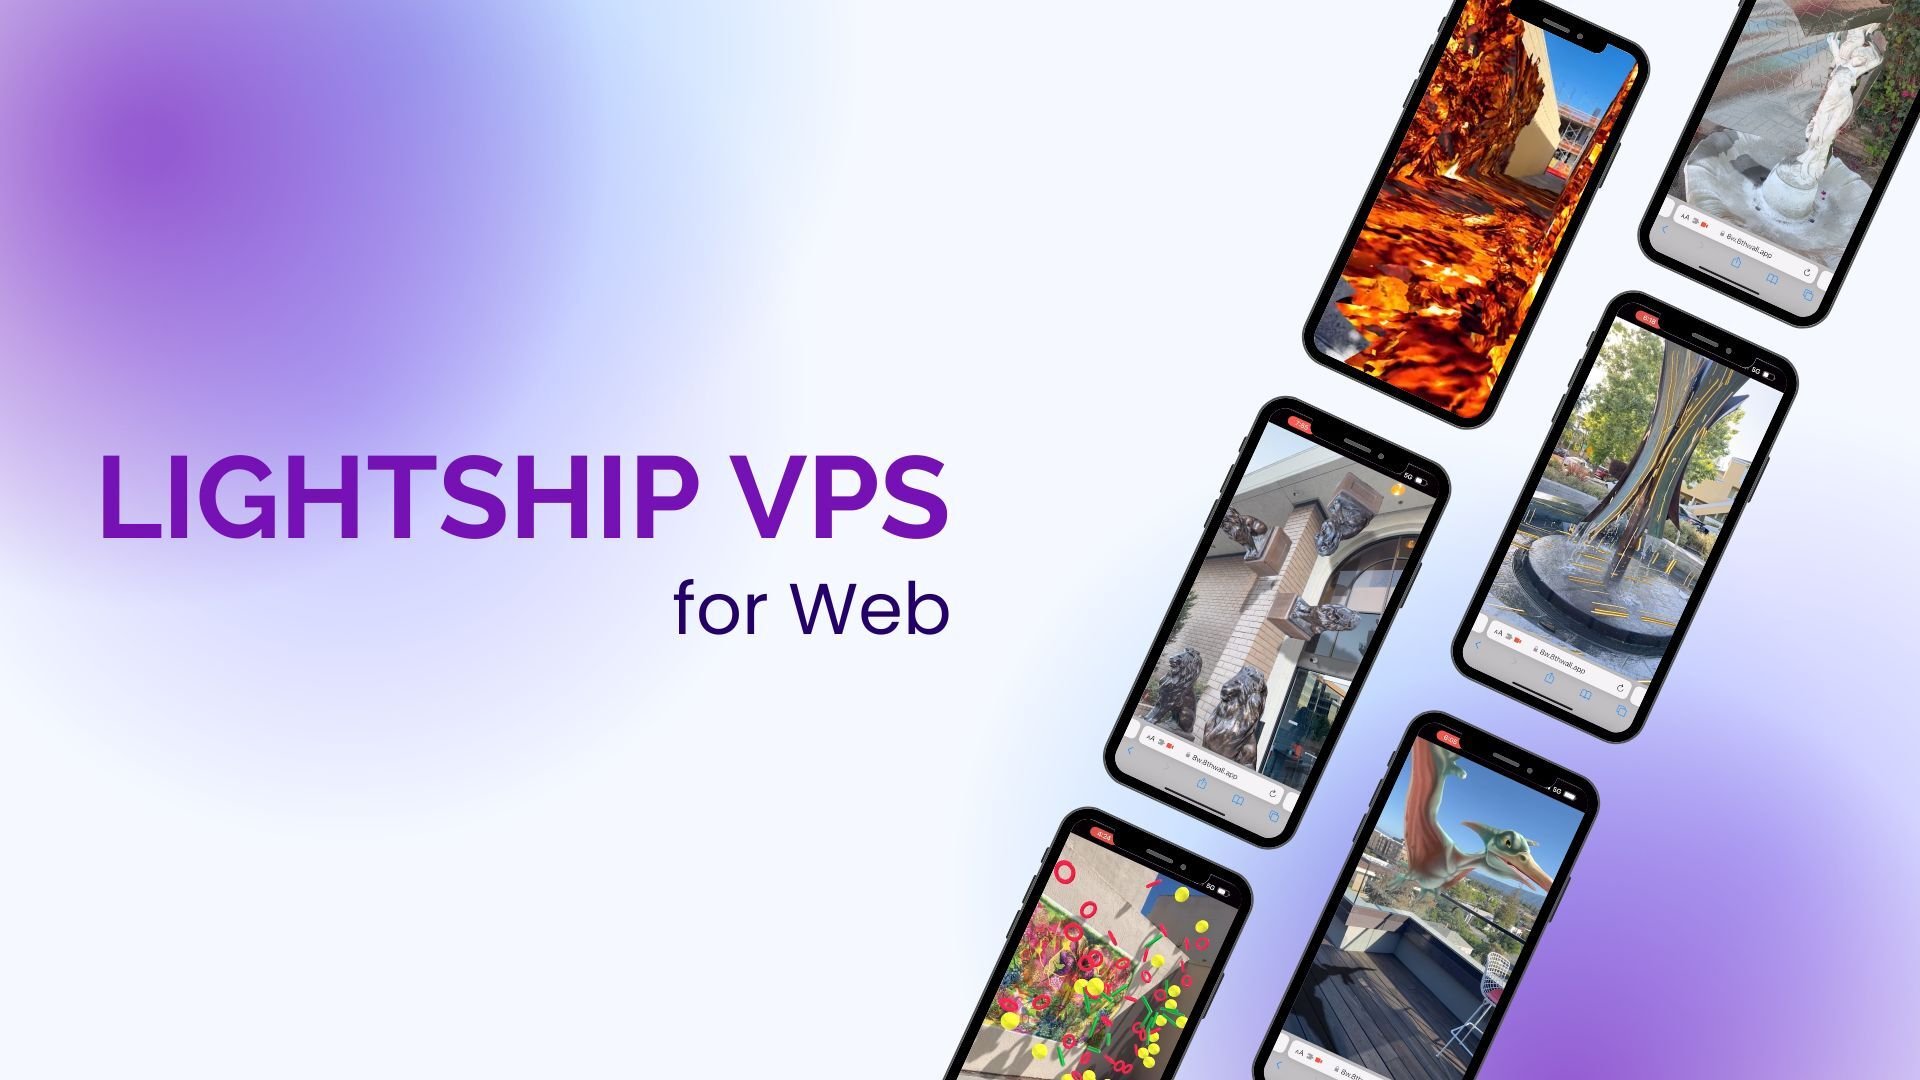 Introducing Lightship VPS for Web